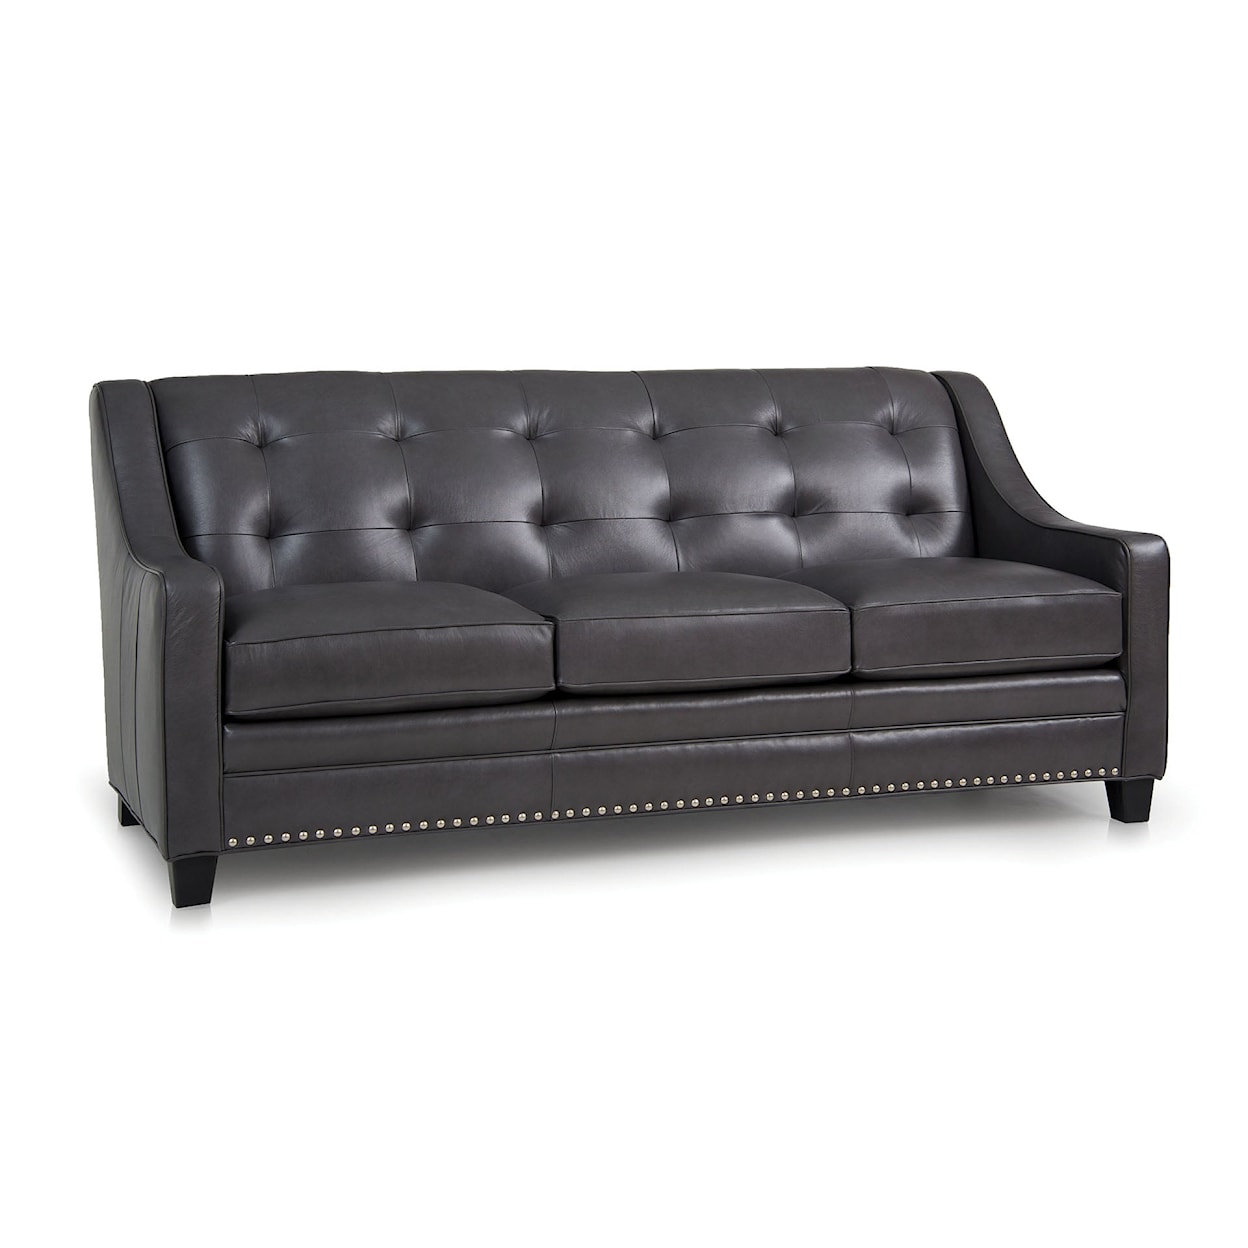 Smith Brothers 203 Sofa with Tufting and Nailheads